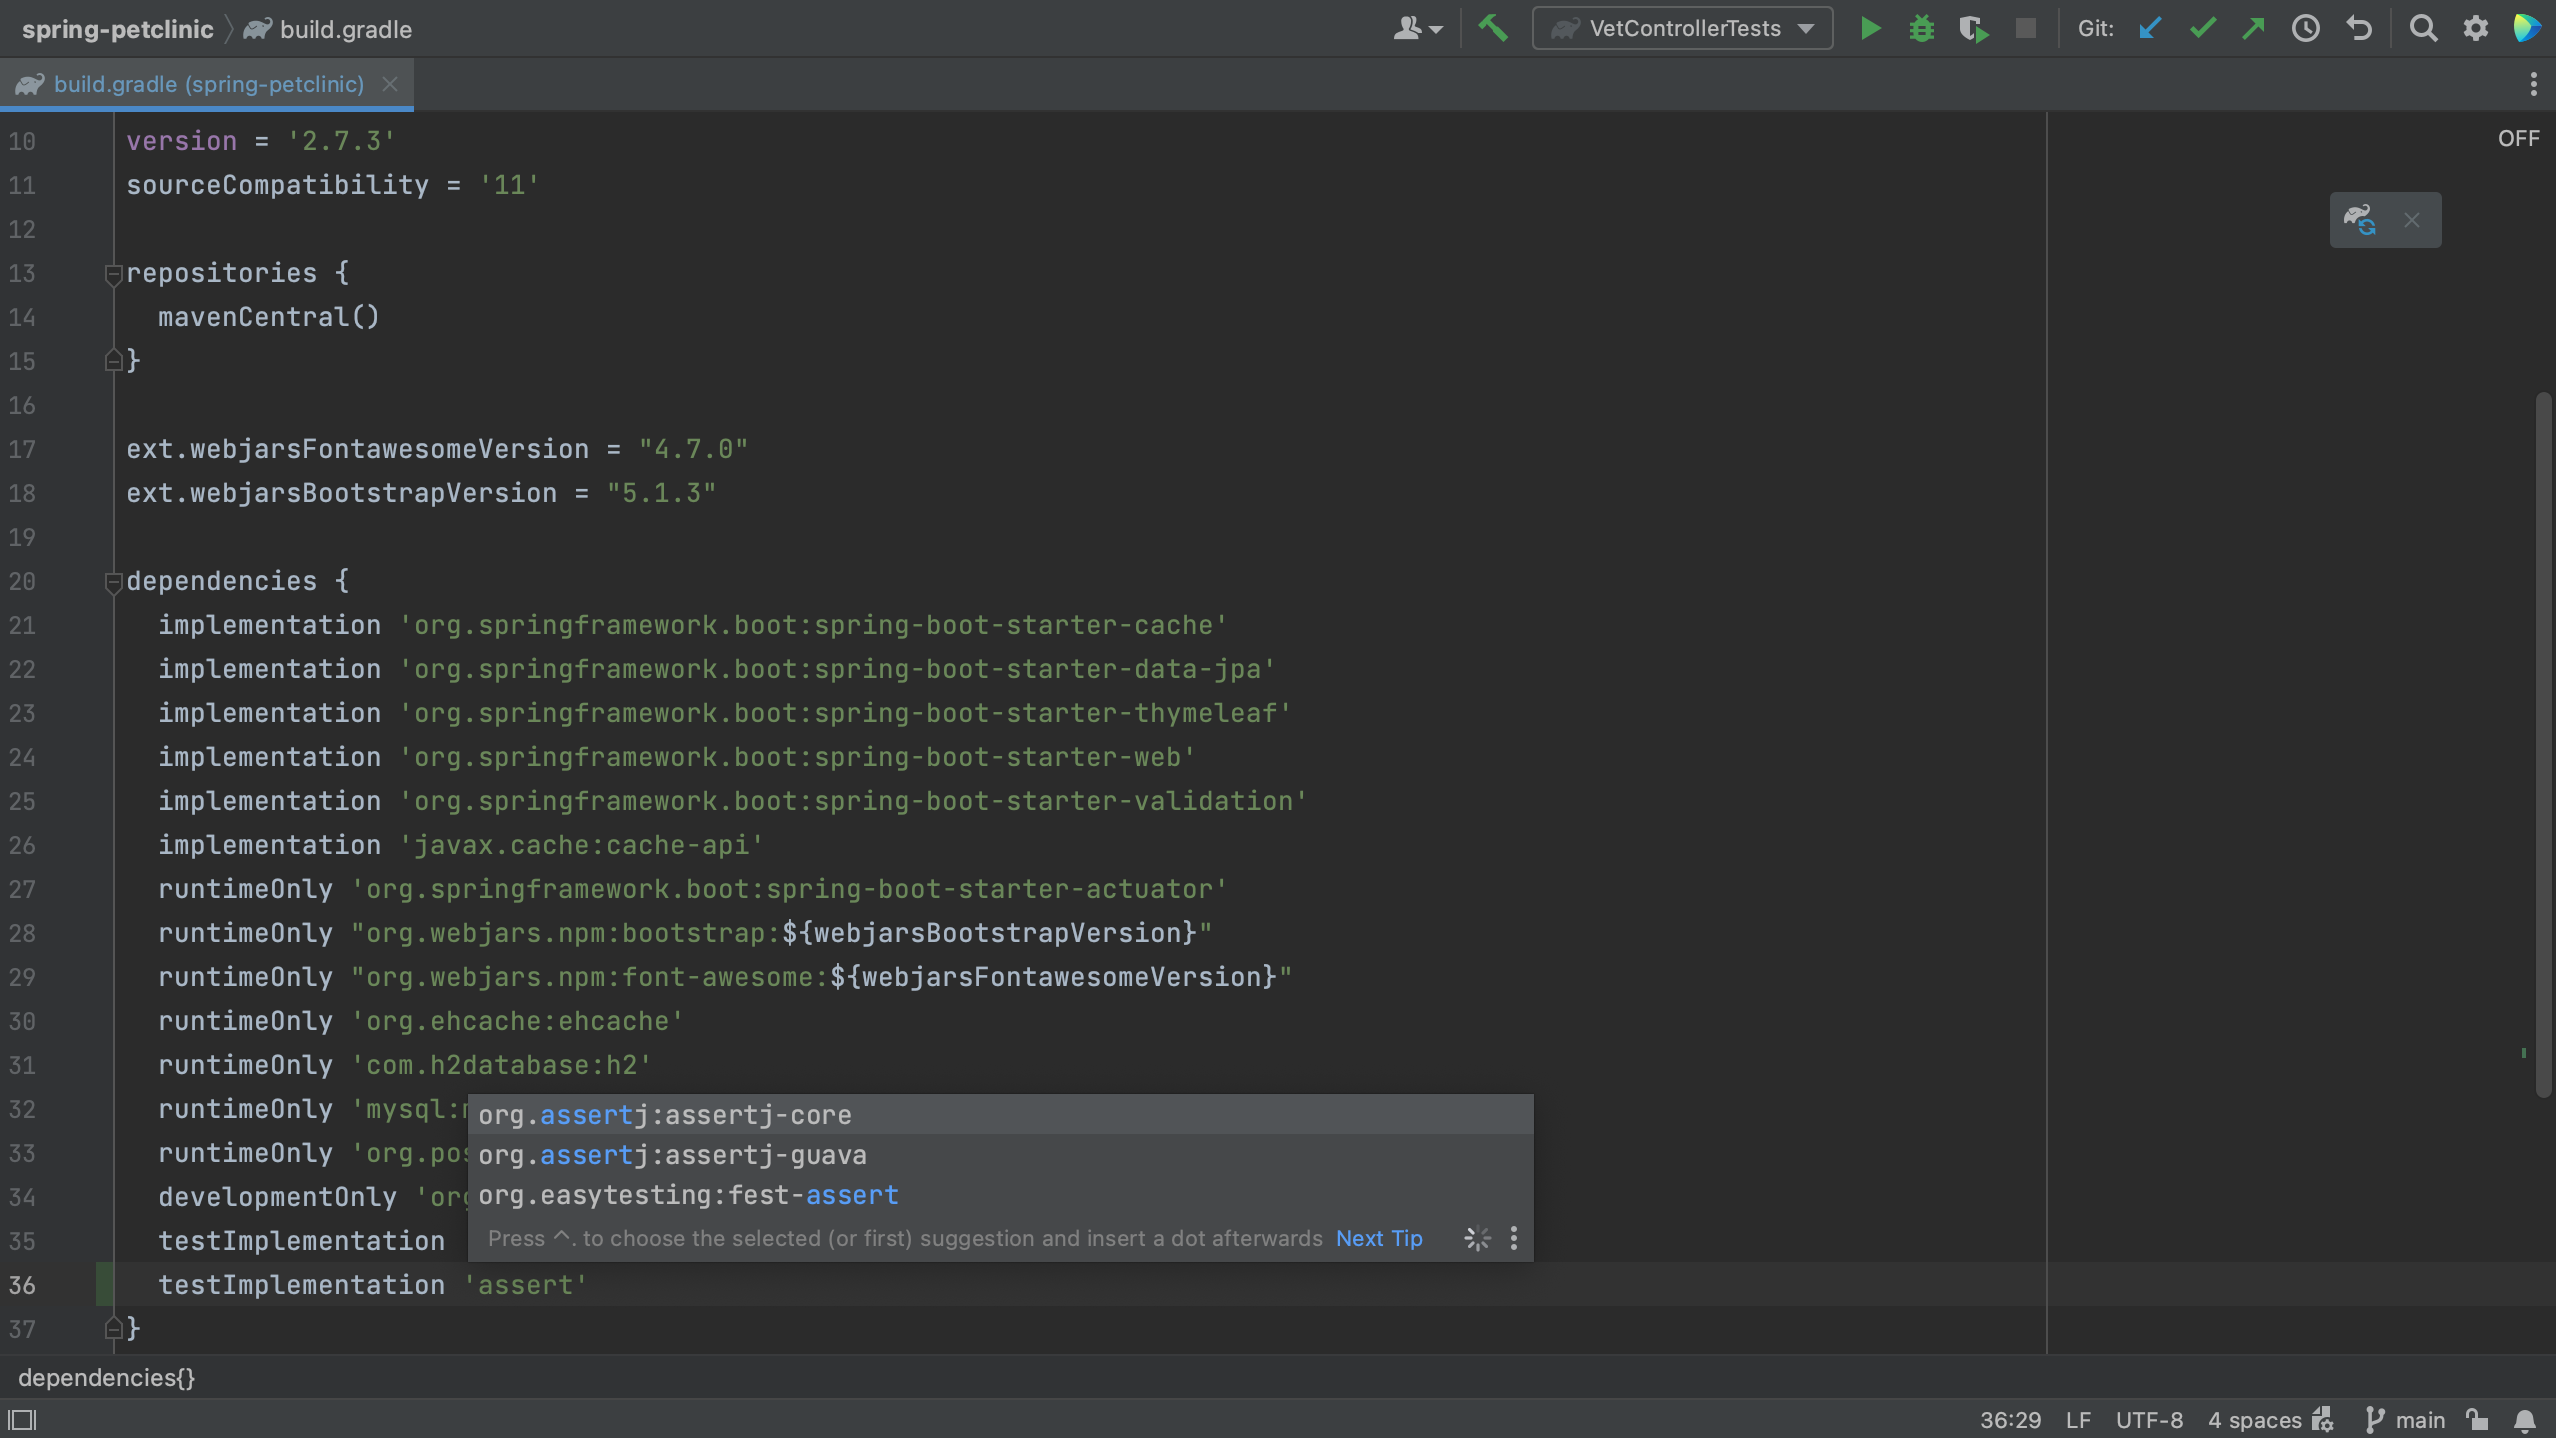 Code completion in build.gradle